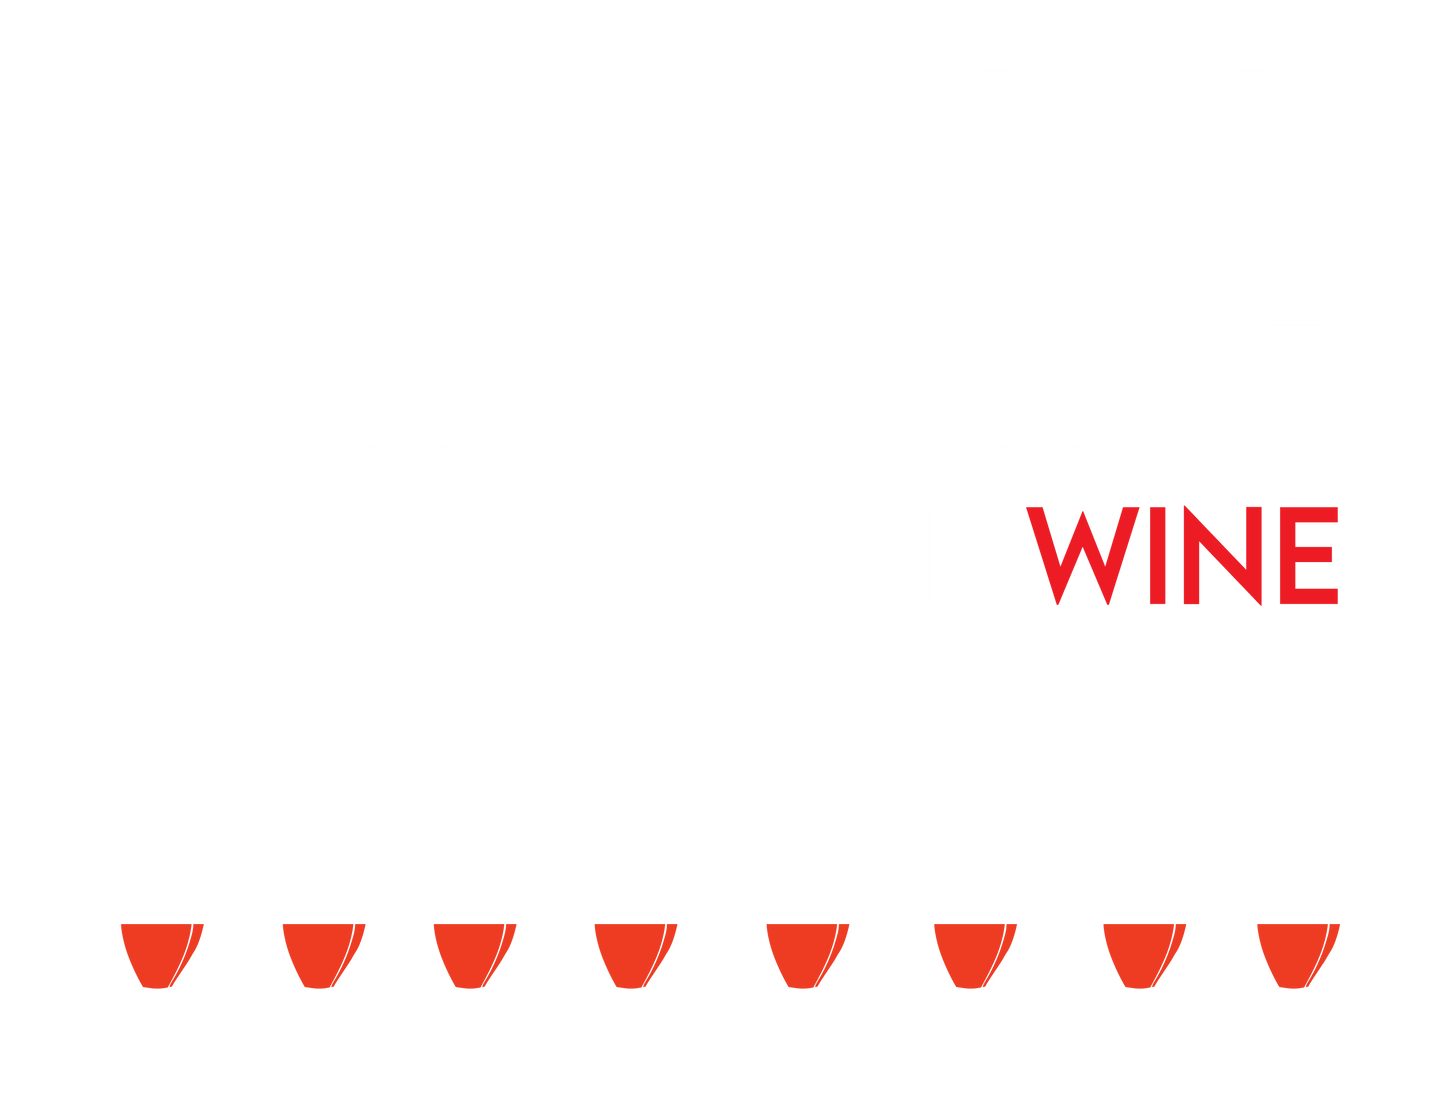 Funny How 8 Glasses Of Water A Day Seems Impossible